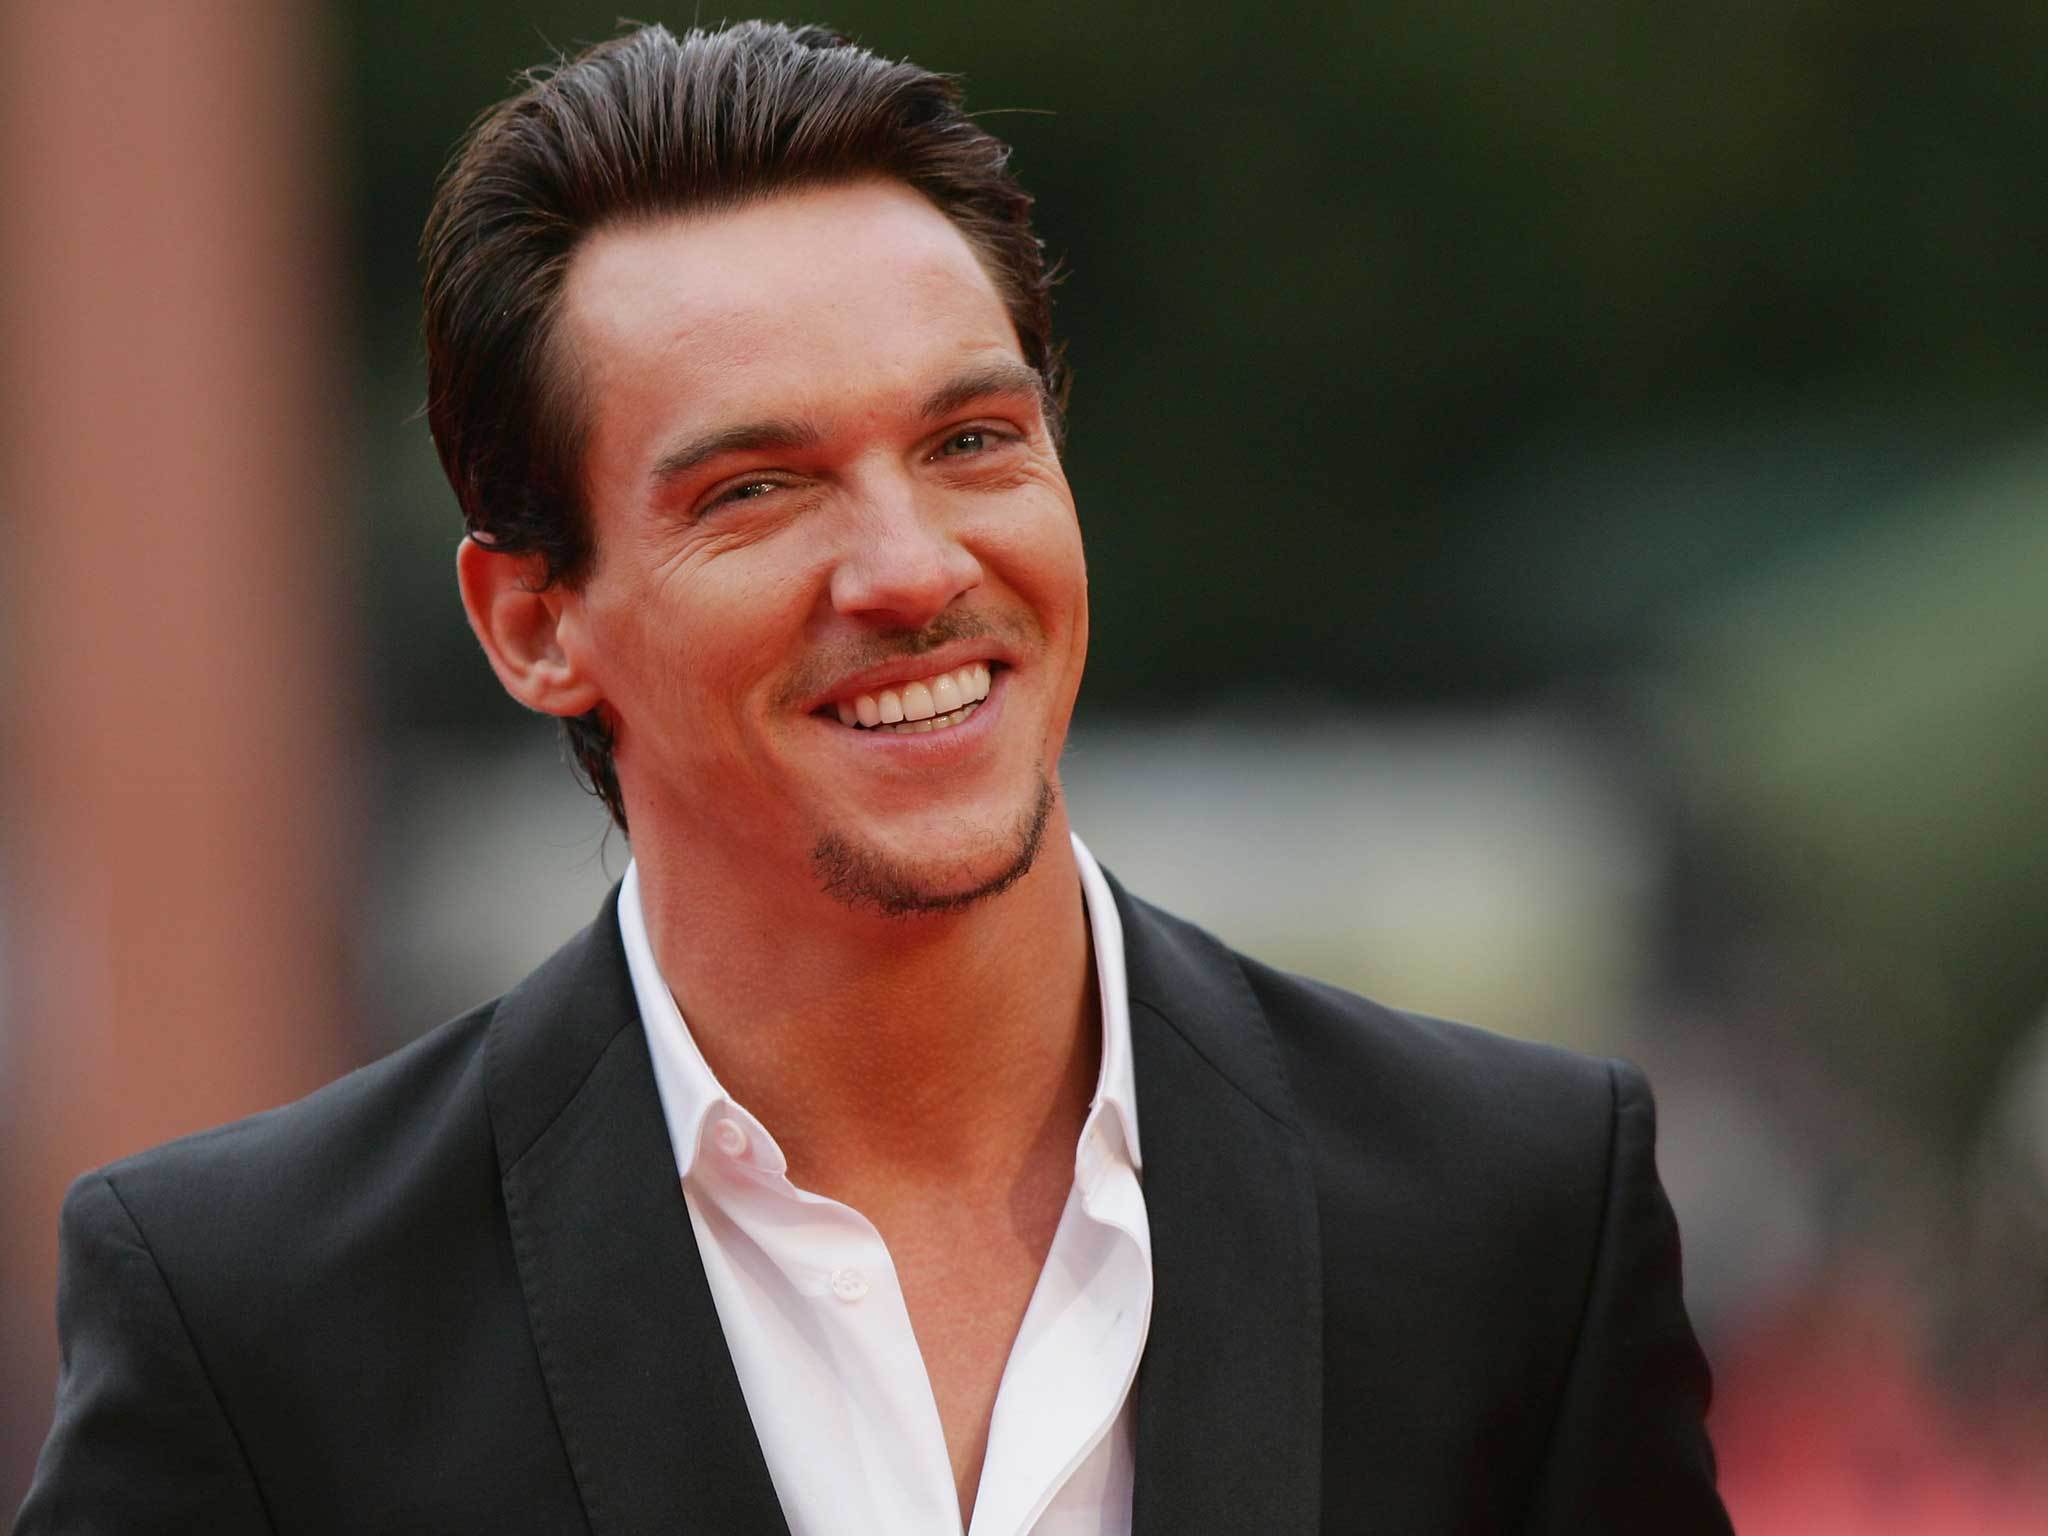 Jonathan Rhys Meyers Wallpaper Image Photos Pictures